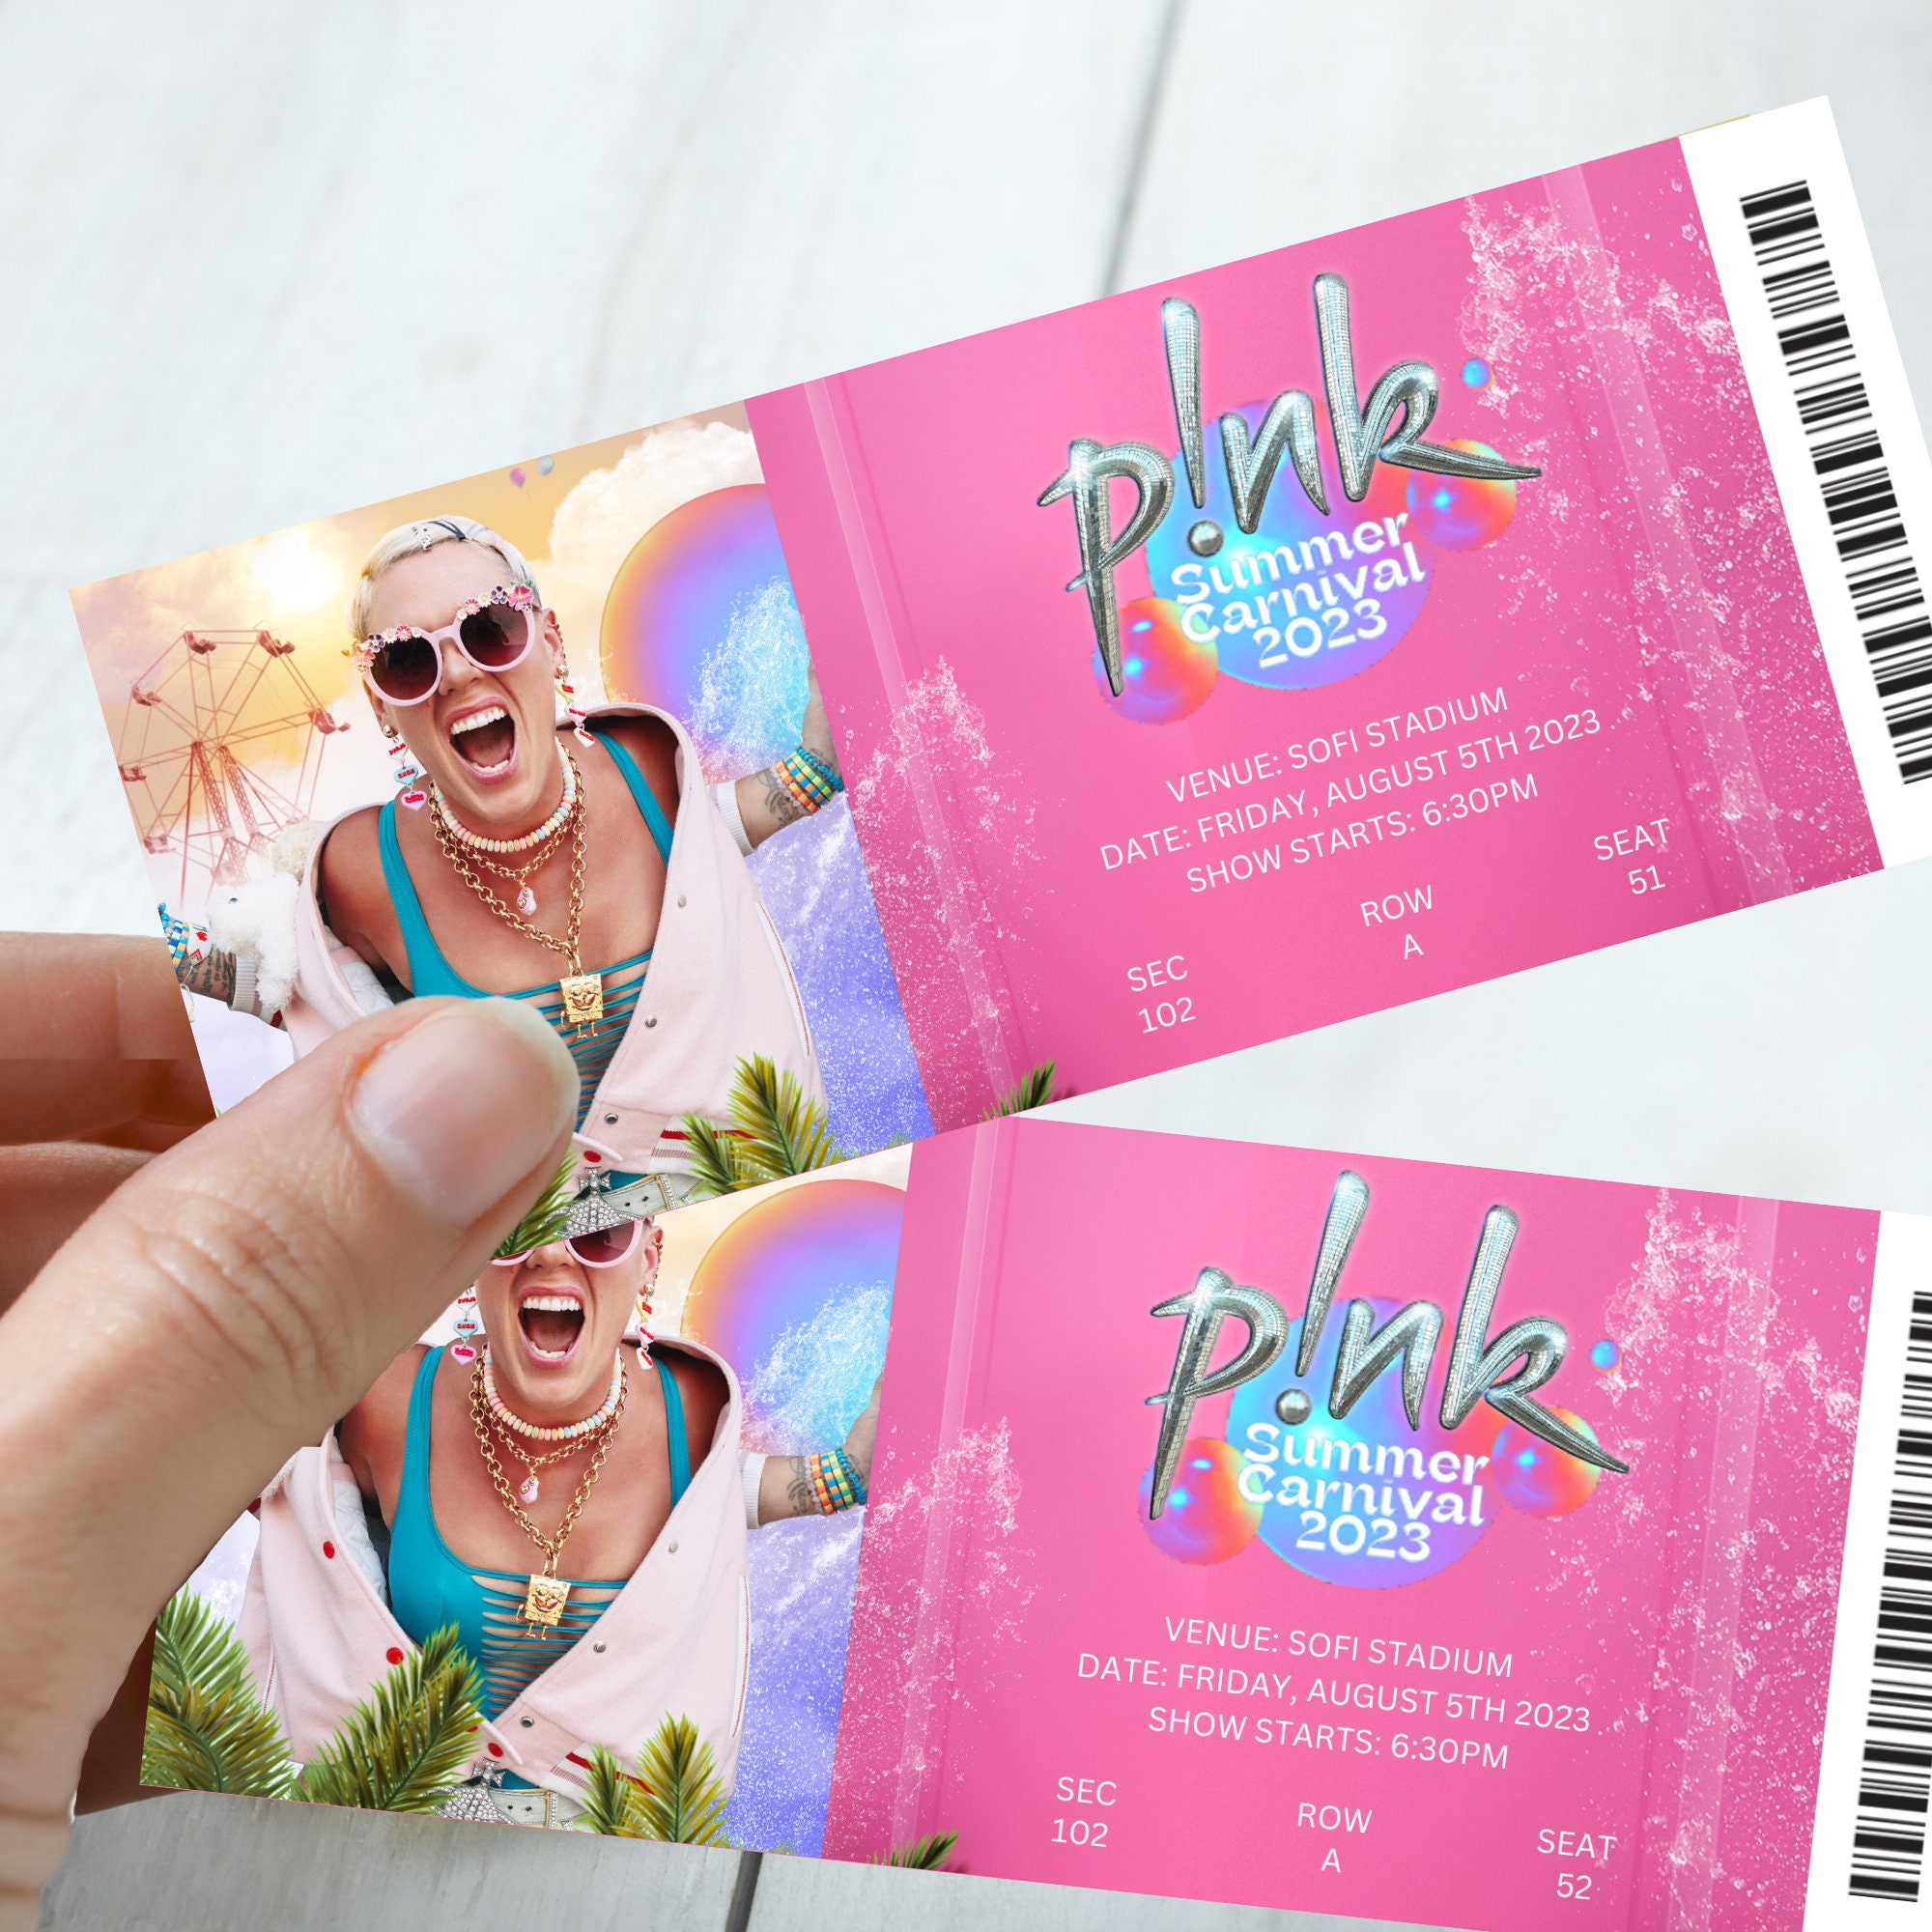 Customizable Surprise Pink Concert Tickets. Summer Carnival Etsy